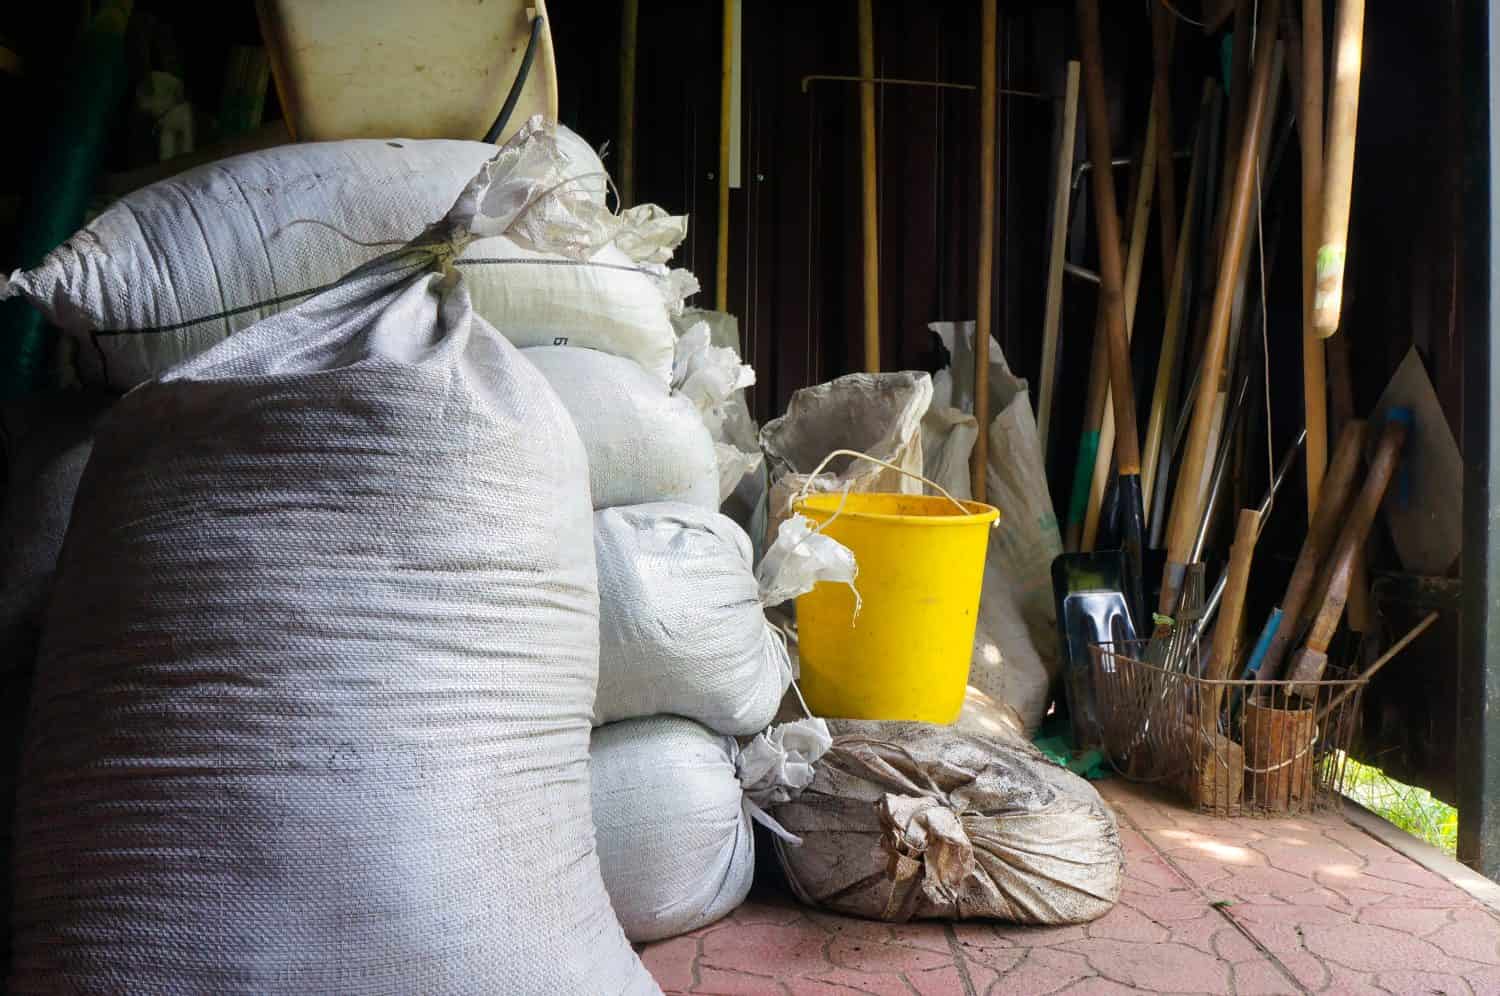 Sackfuls of Fertilizers and Agricultural Tools in Garden Shed. 